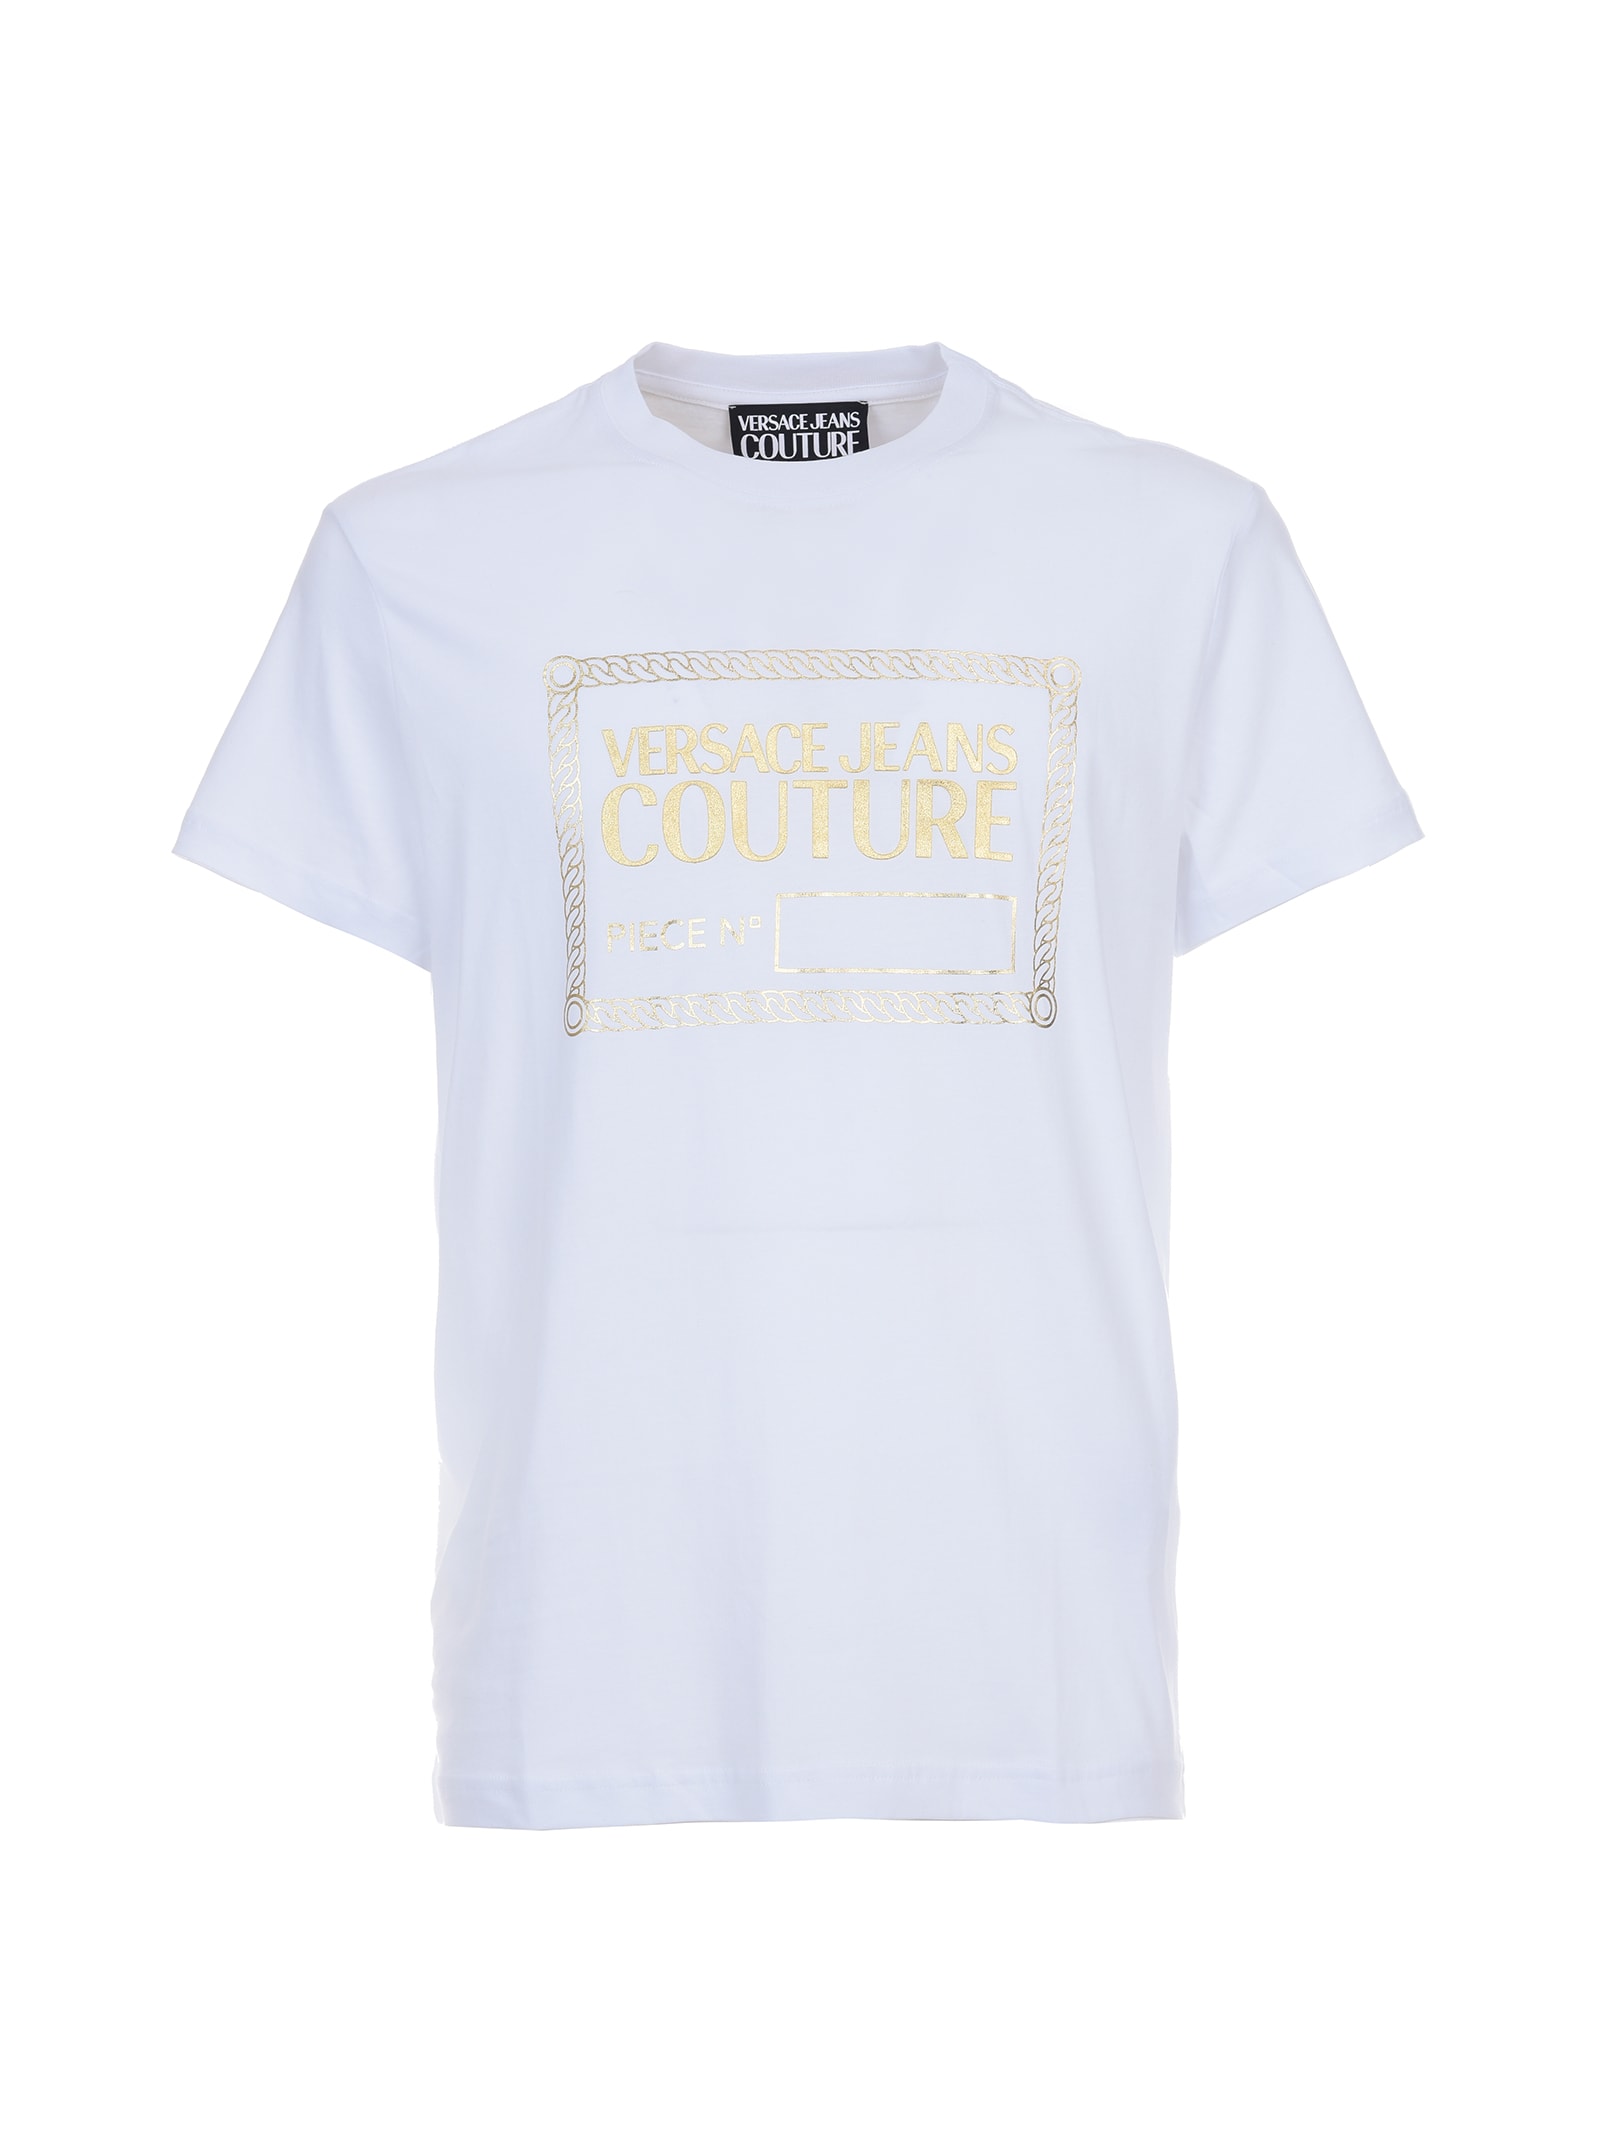 Versace Jeans Couture White & Gold T-shirt With Brand Name On Chest